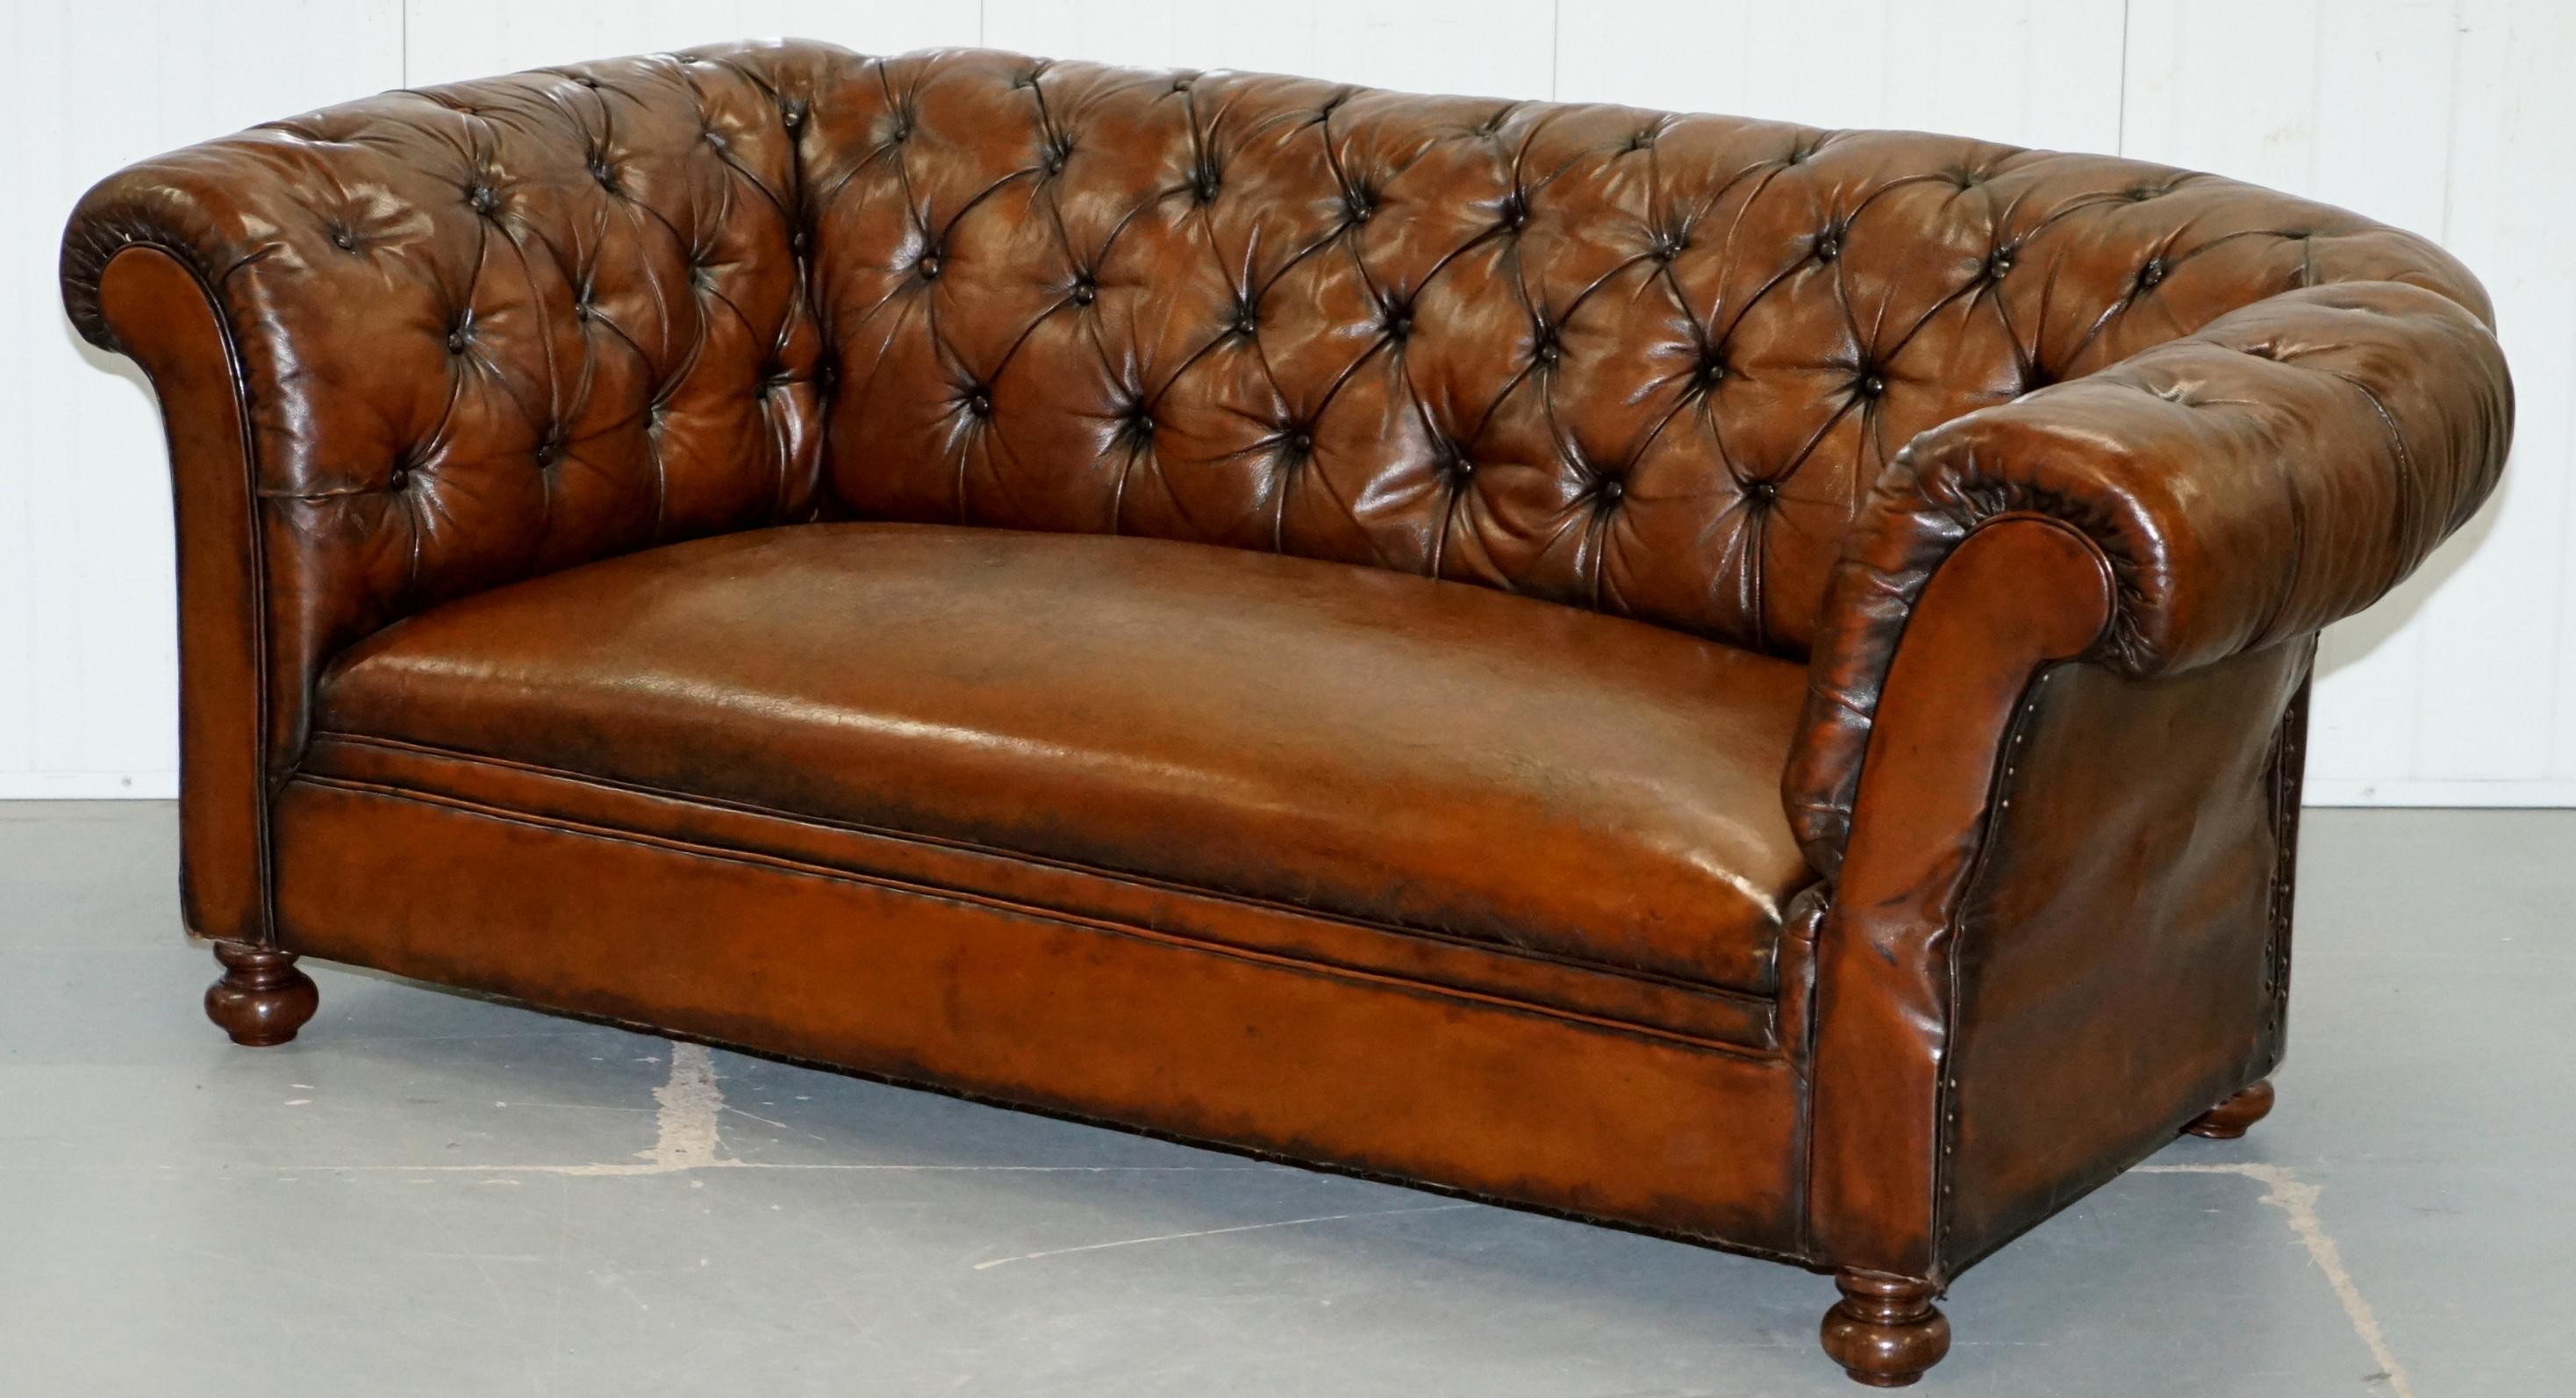 English Restored Victorian Drop Arm Chesterfield Buttoned Hand Dyed Brown Leather Sofa